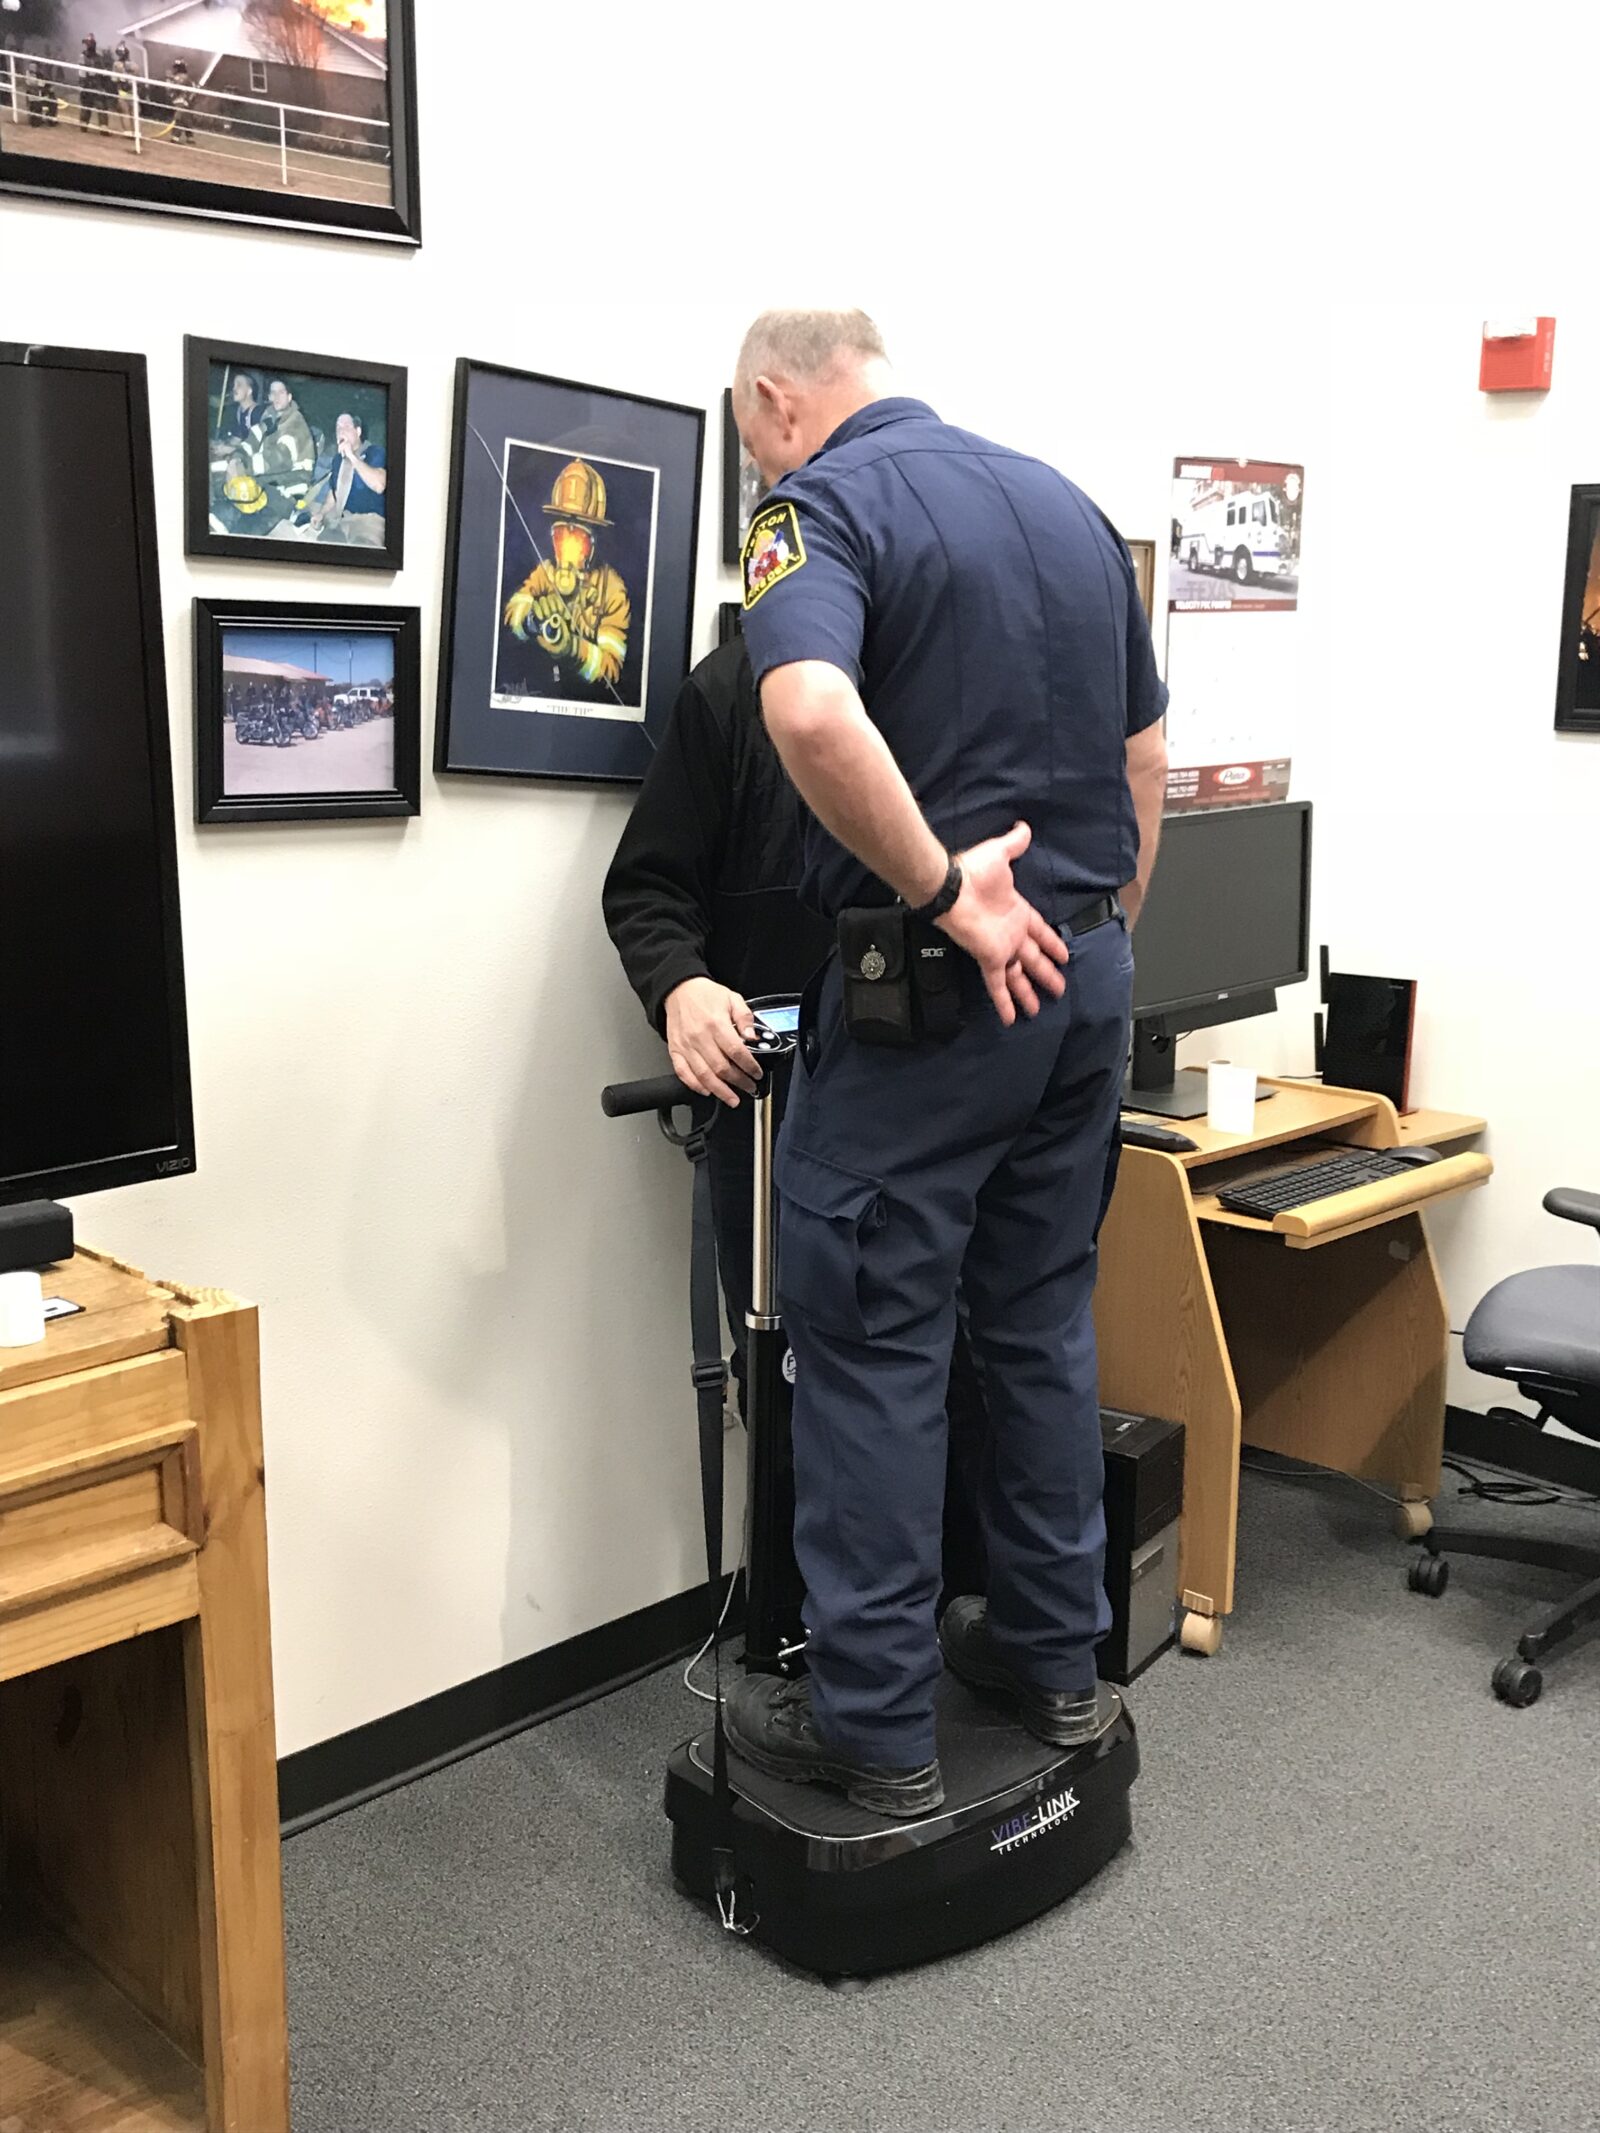 Battalion Chief, David Boots Experiencing Central fire Station's Very Own Vibe-Link Technology!